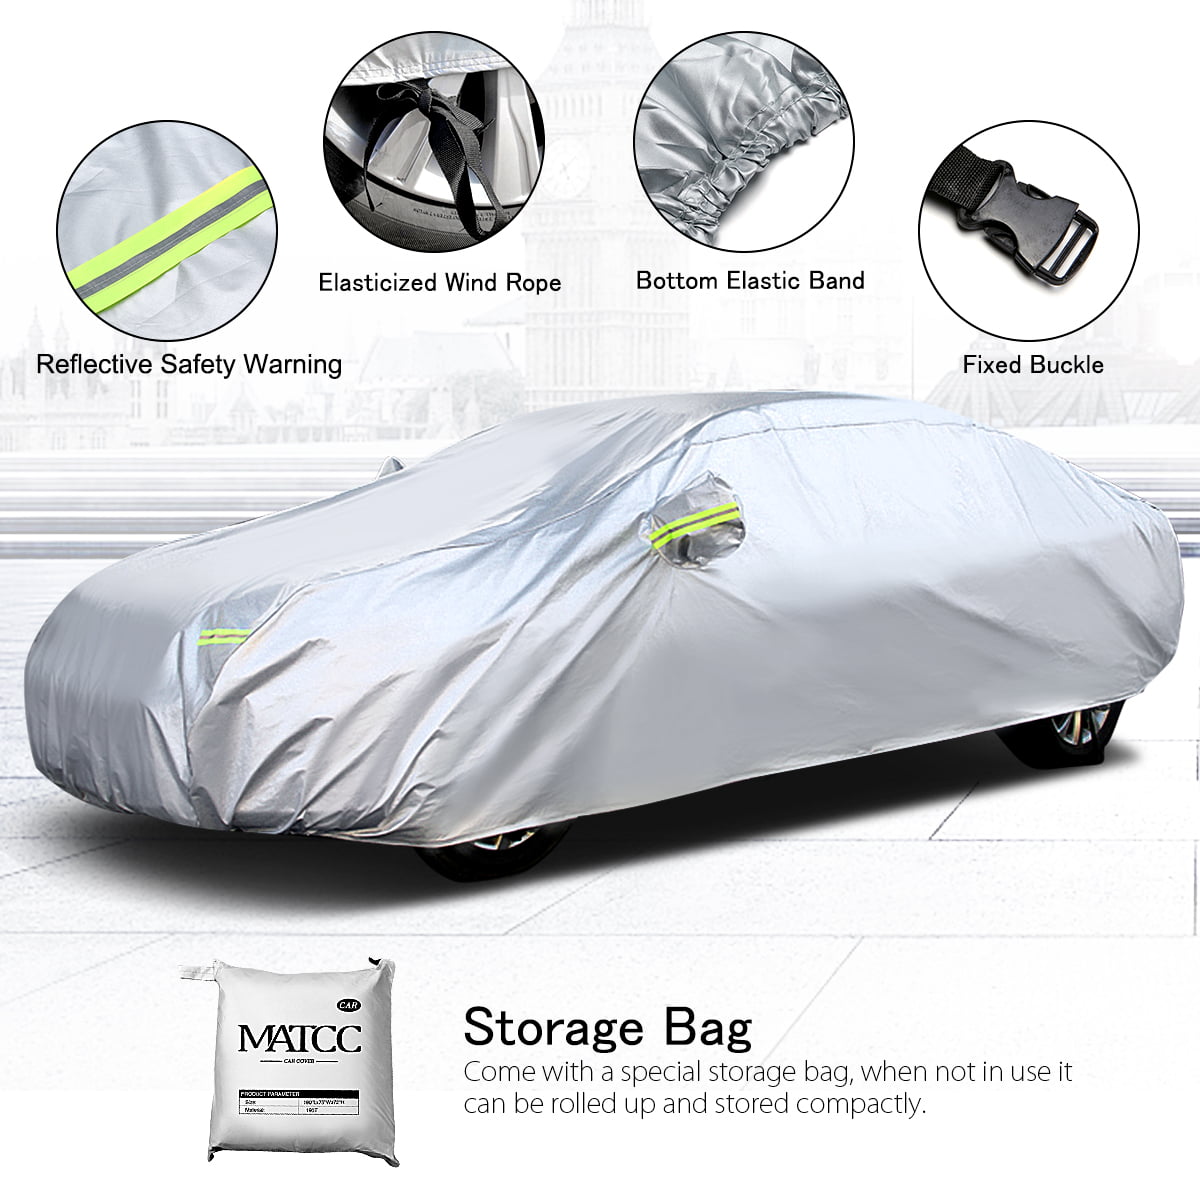 MATCC Car Covers Waterproof Upgraded UV Protection Sedan Cover Universal Fit Full Car Cover Up to 185 L 